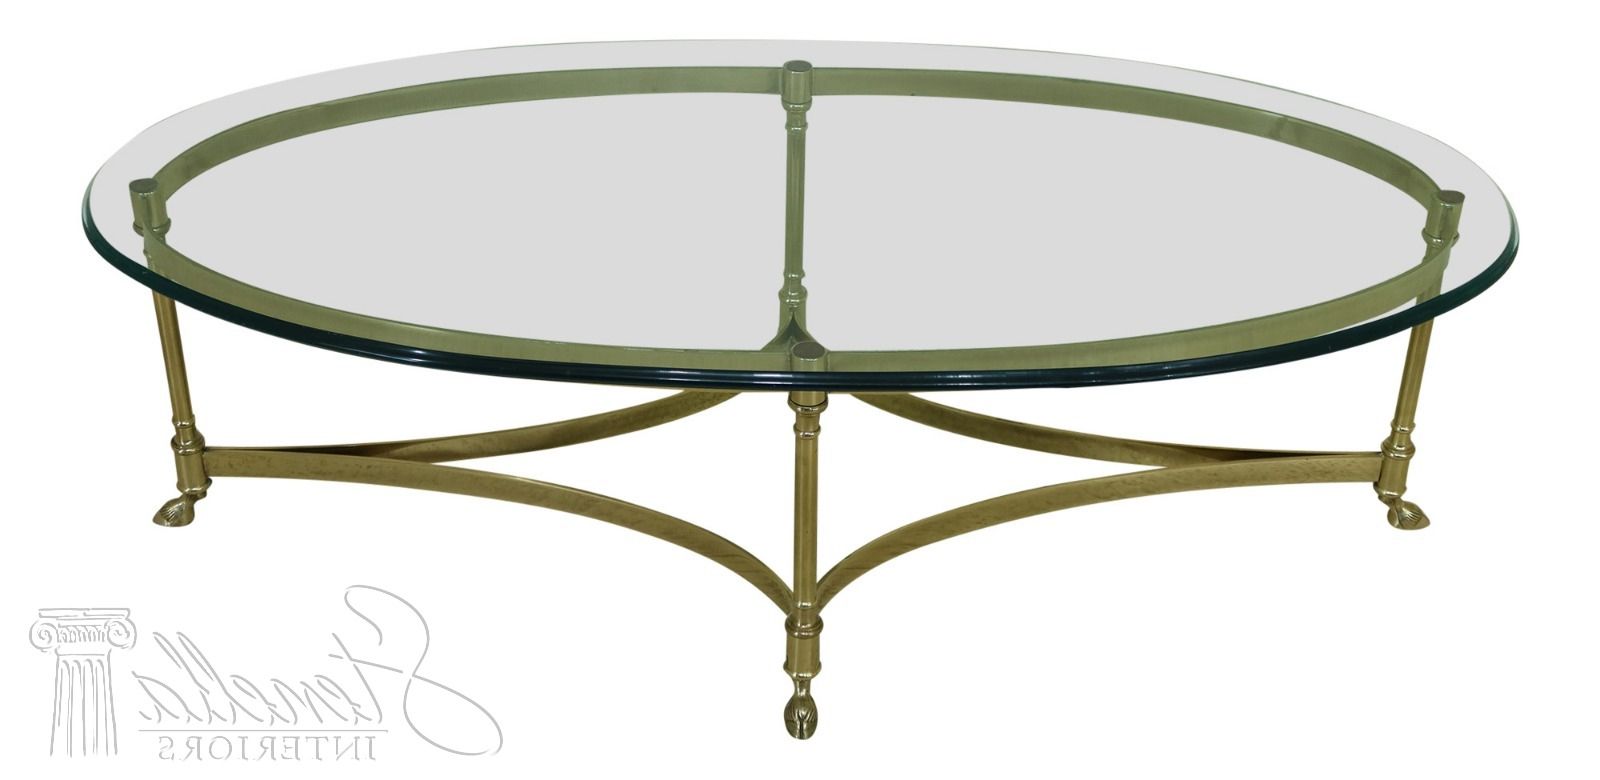 2020 Glass And Gold Oval Coffee Tables Pertaining To 32017ec: Labarge Oval Brass & Glass Regency Coffee Table (View 3 of 20)